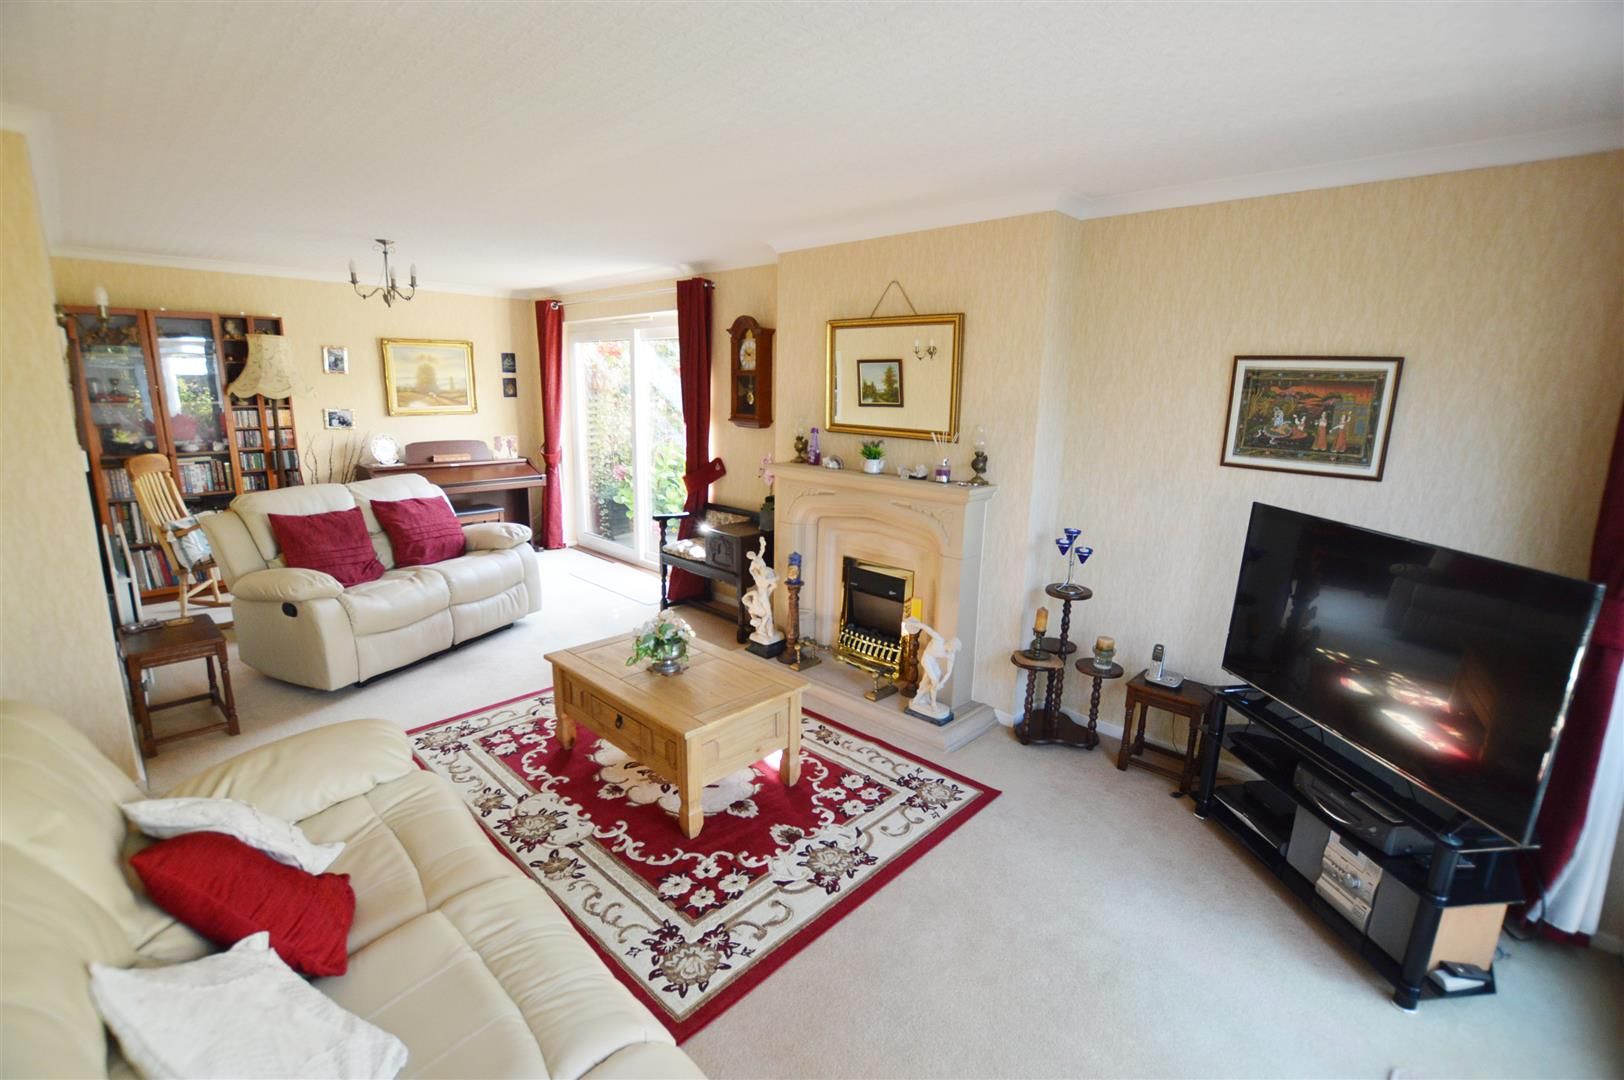 4 bed detached for sale in Luston  - Property Image 2